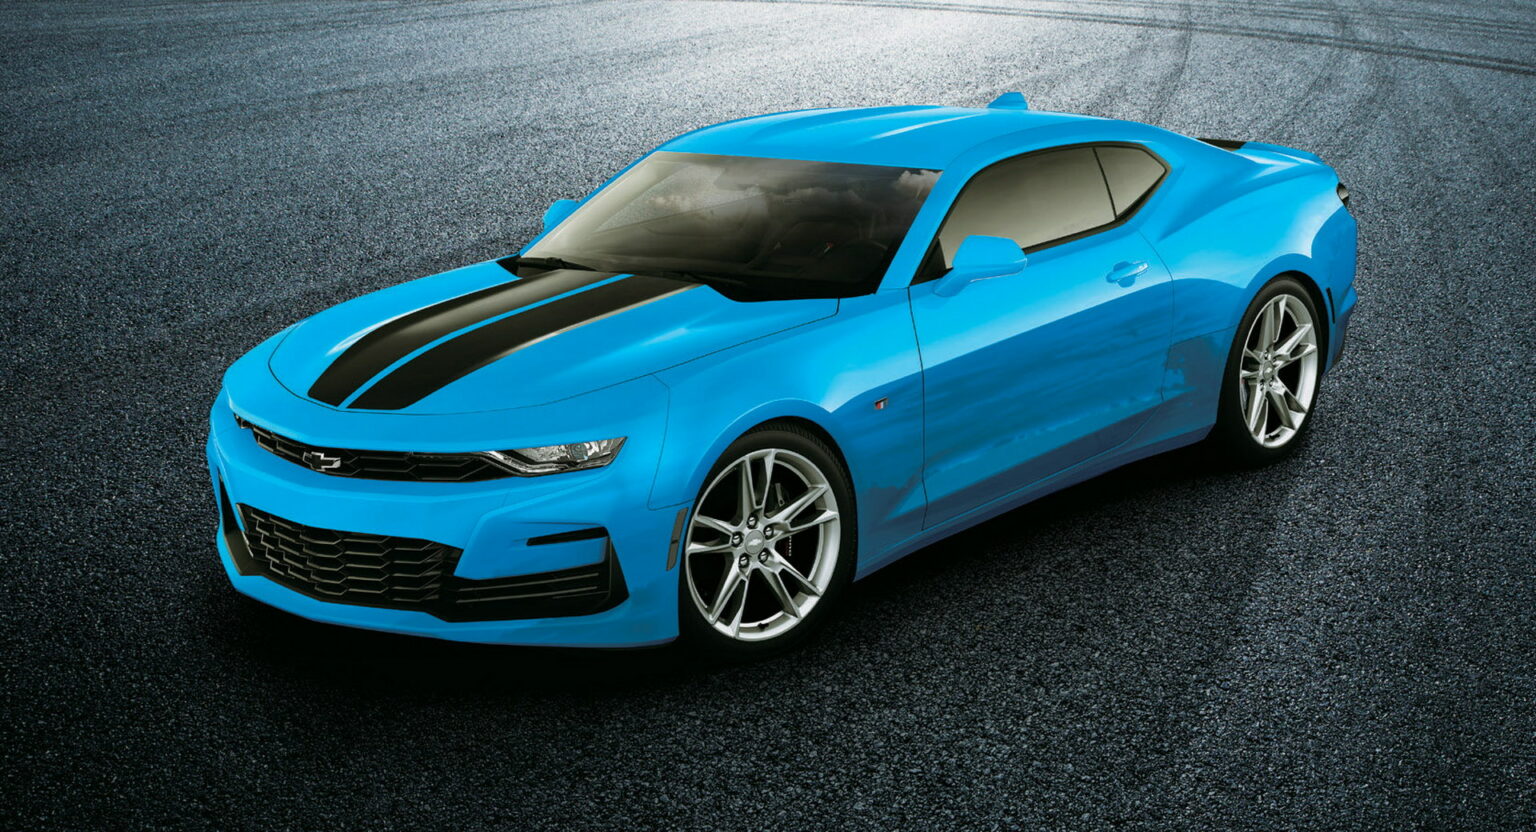 Chevrolet Camaro Rapid Blue Edition Is Limited To Units For Japan